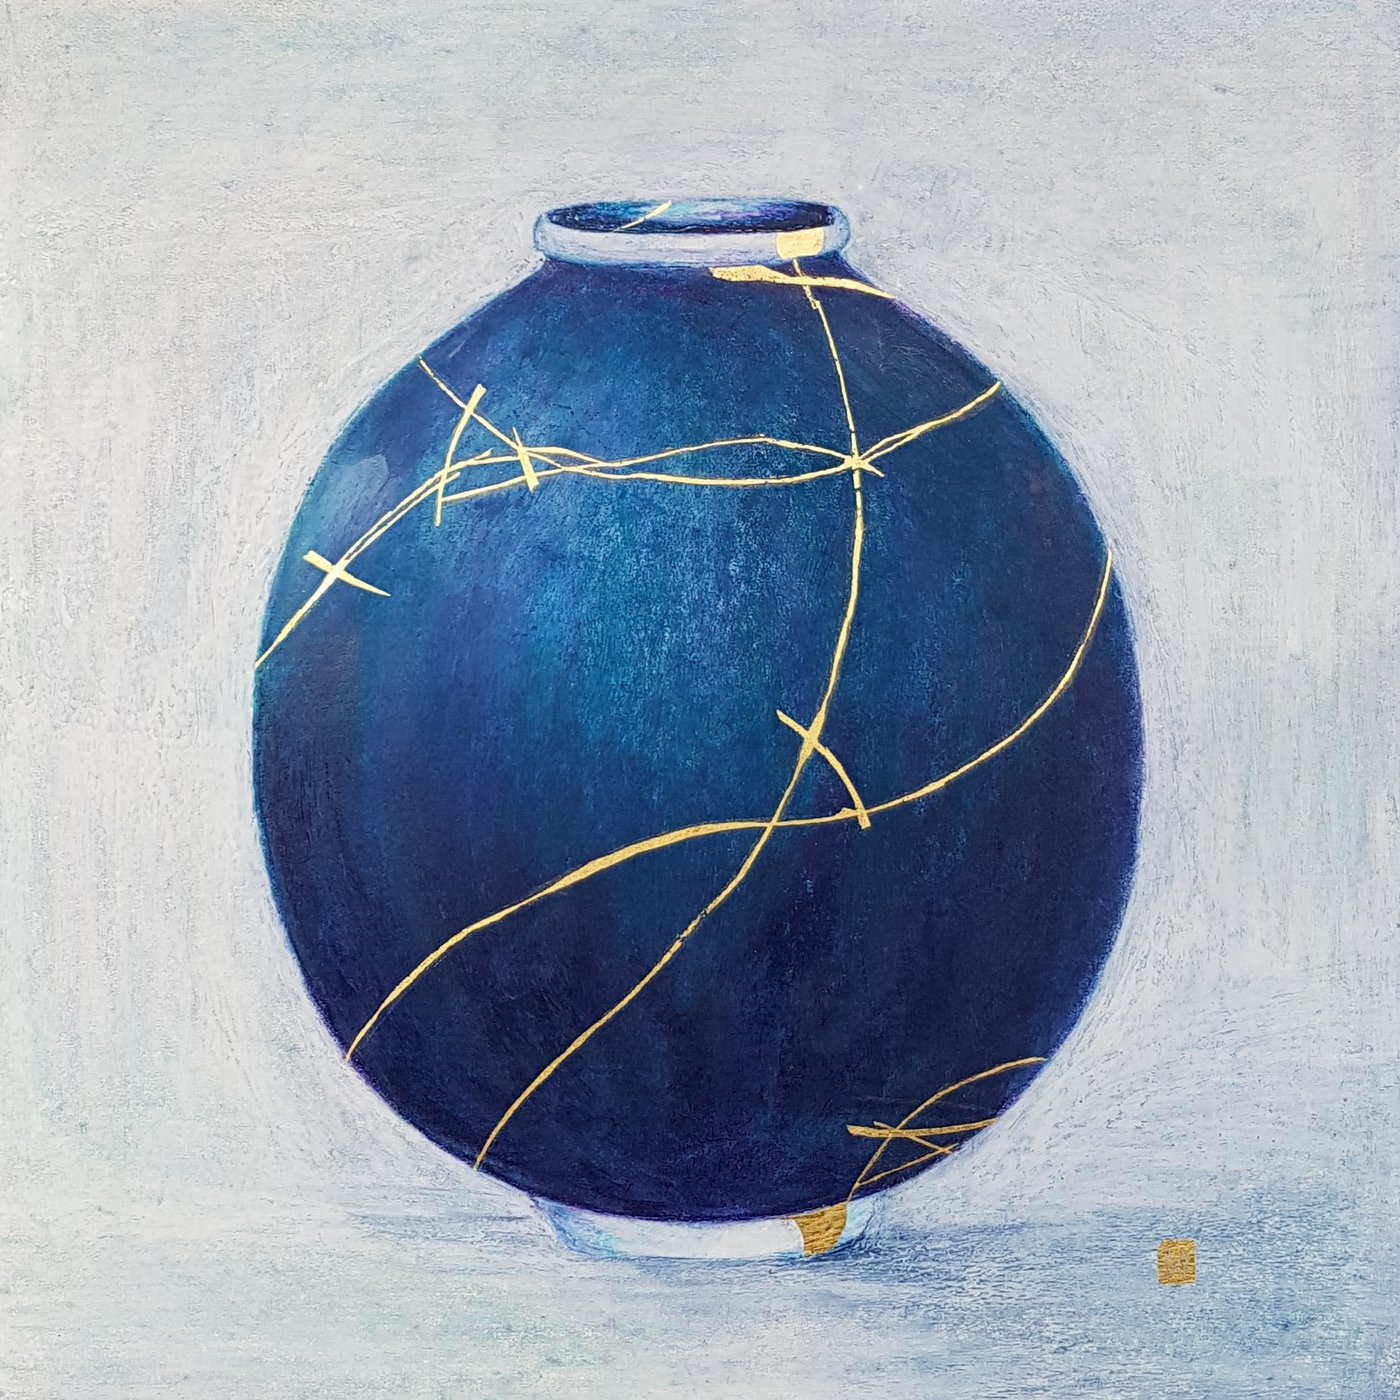 Contemporary large kintsugi vessel with gold repair –blue, teal, purple